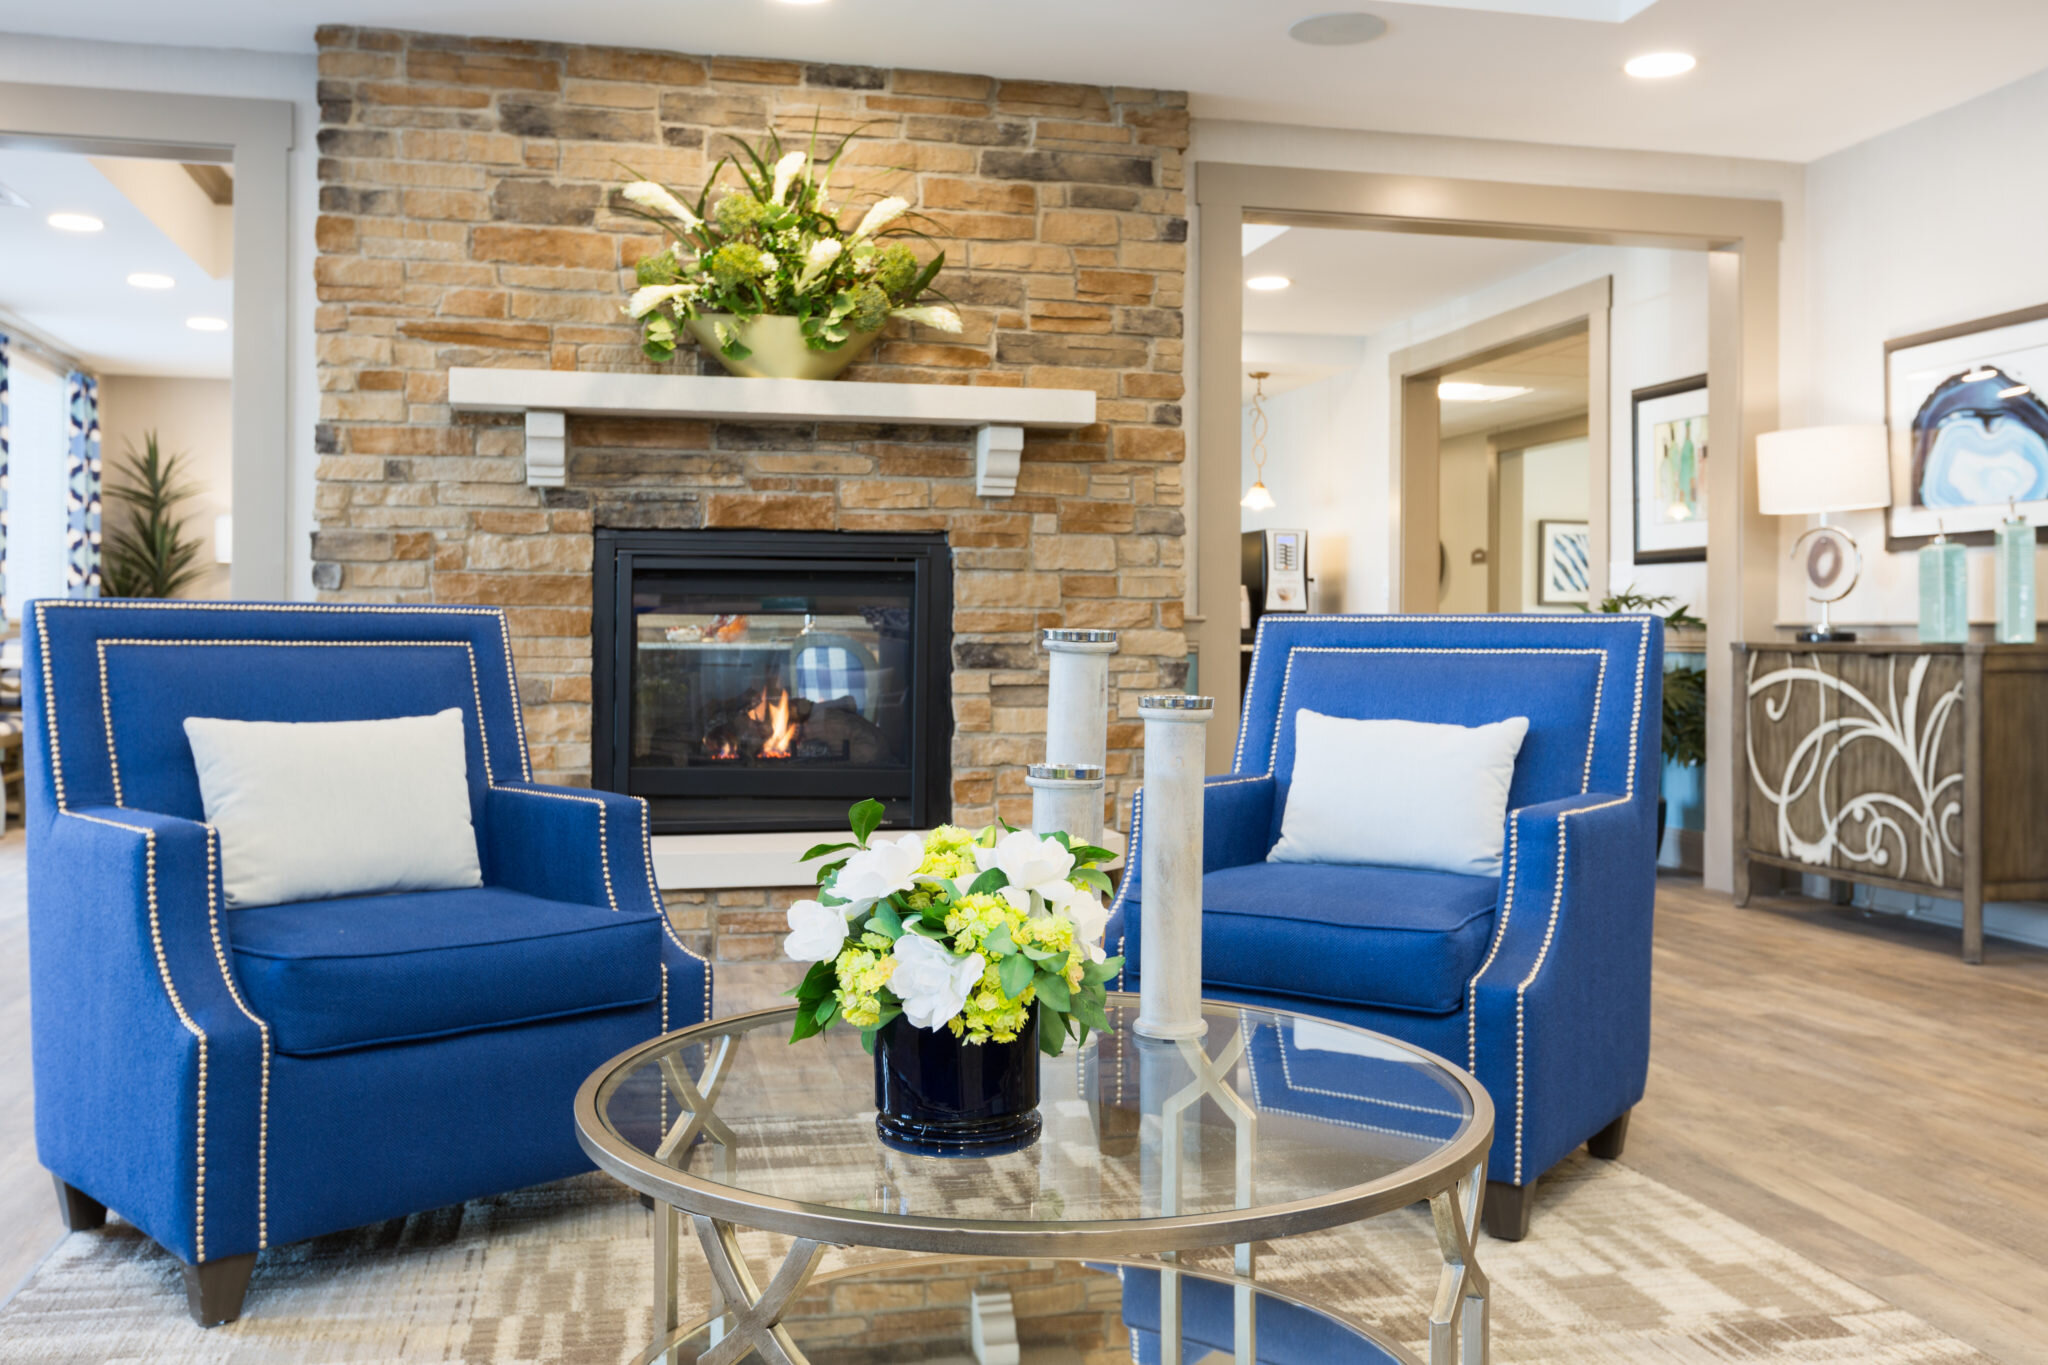 Burr Ridge Independent Living, Assisted Living & Memory Care Lobby Fireplace.jpg